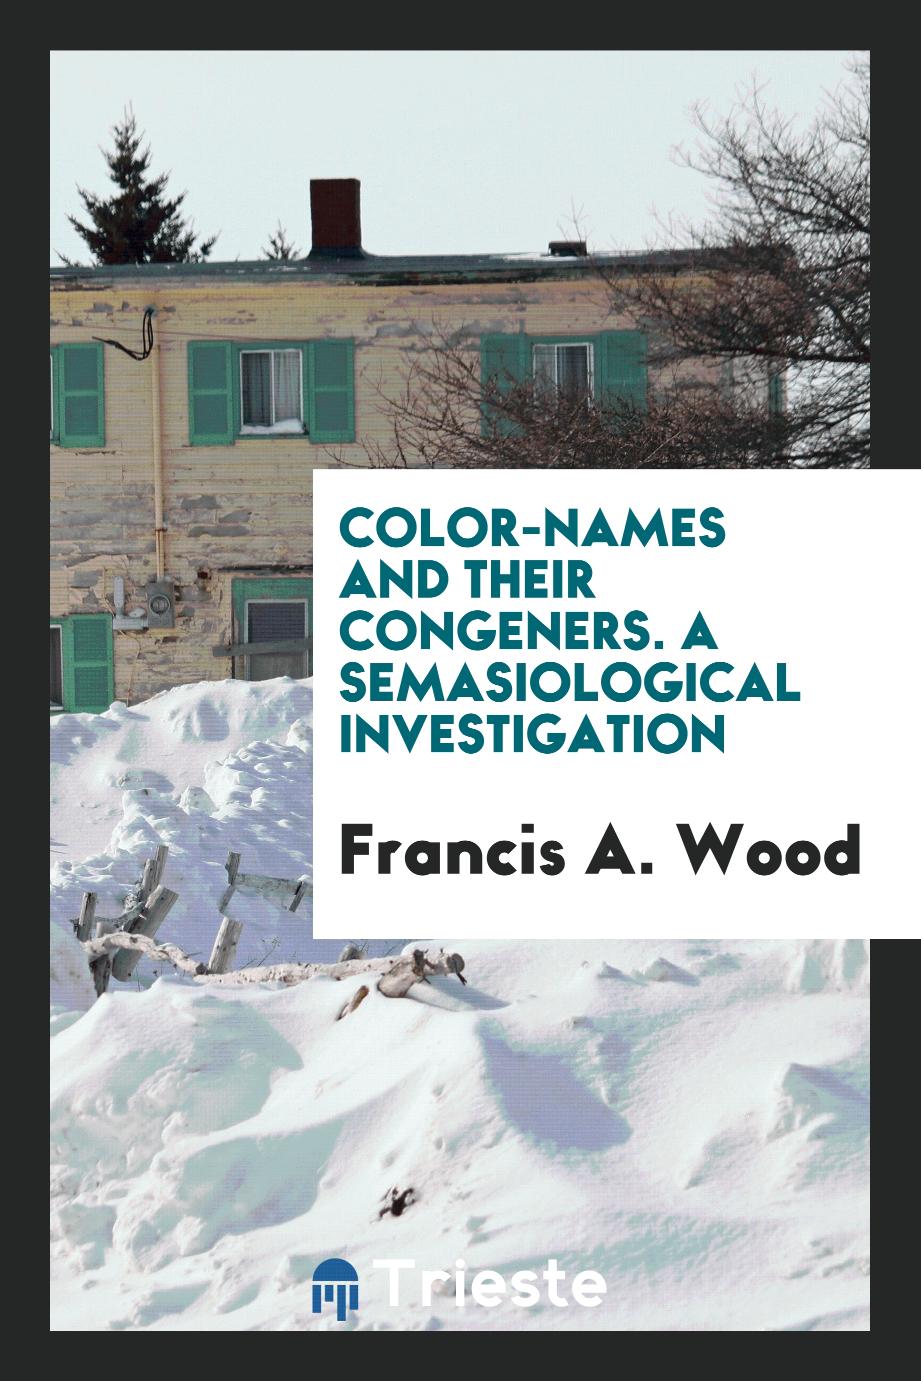 Color-Names and Their Congeners. A Semasiological Investigation